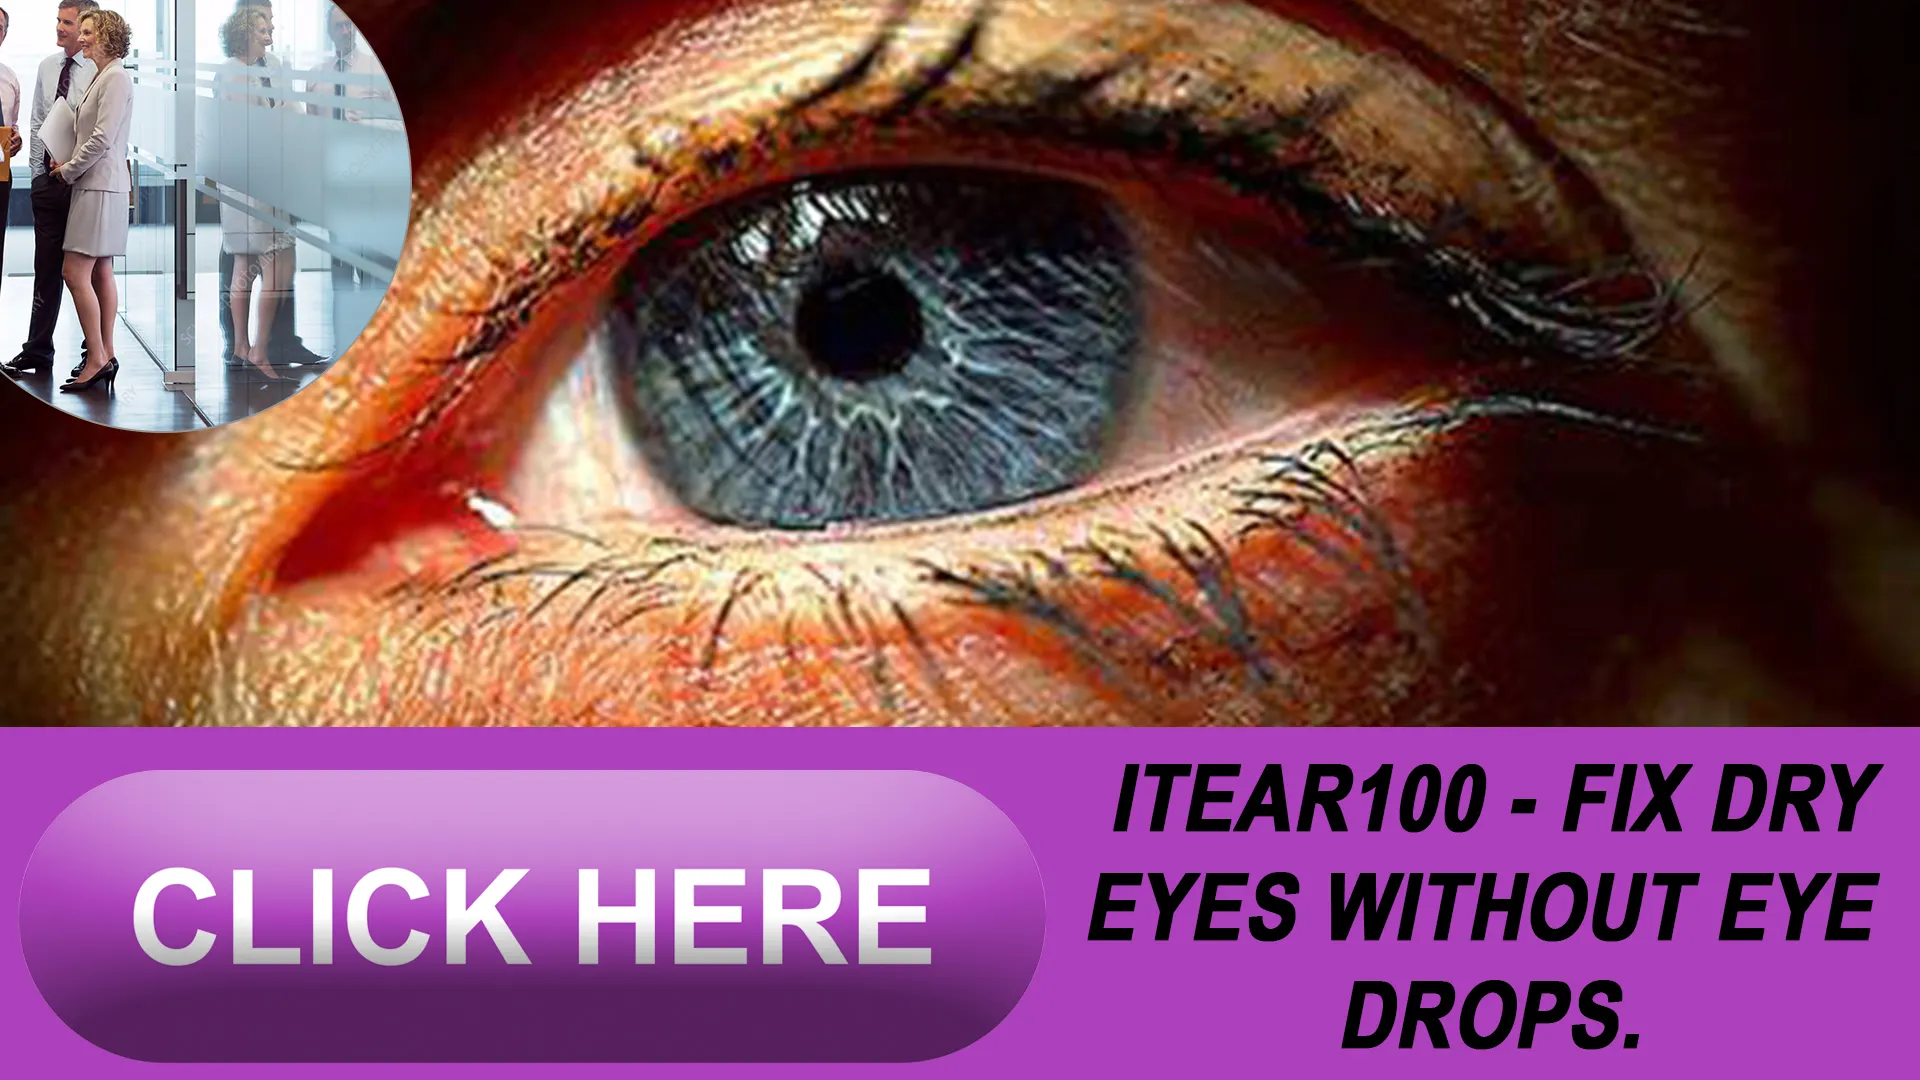 Personalizing Your Dry Eye Treatment